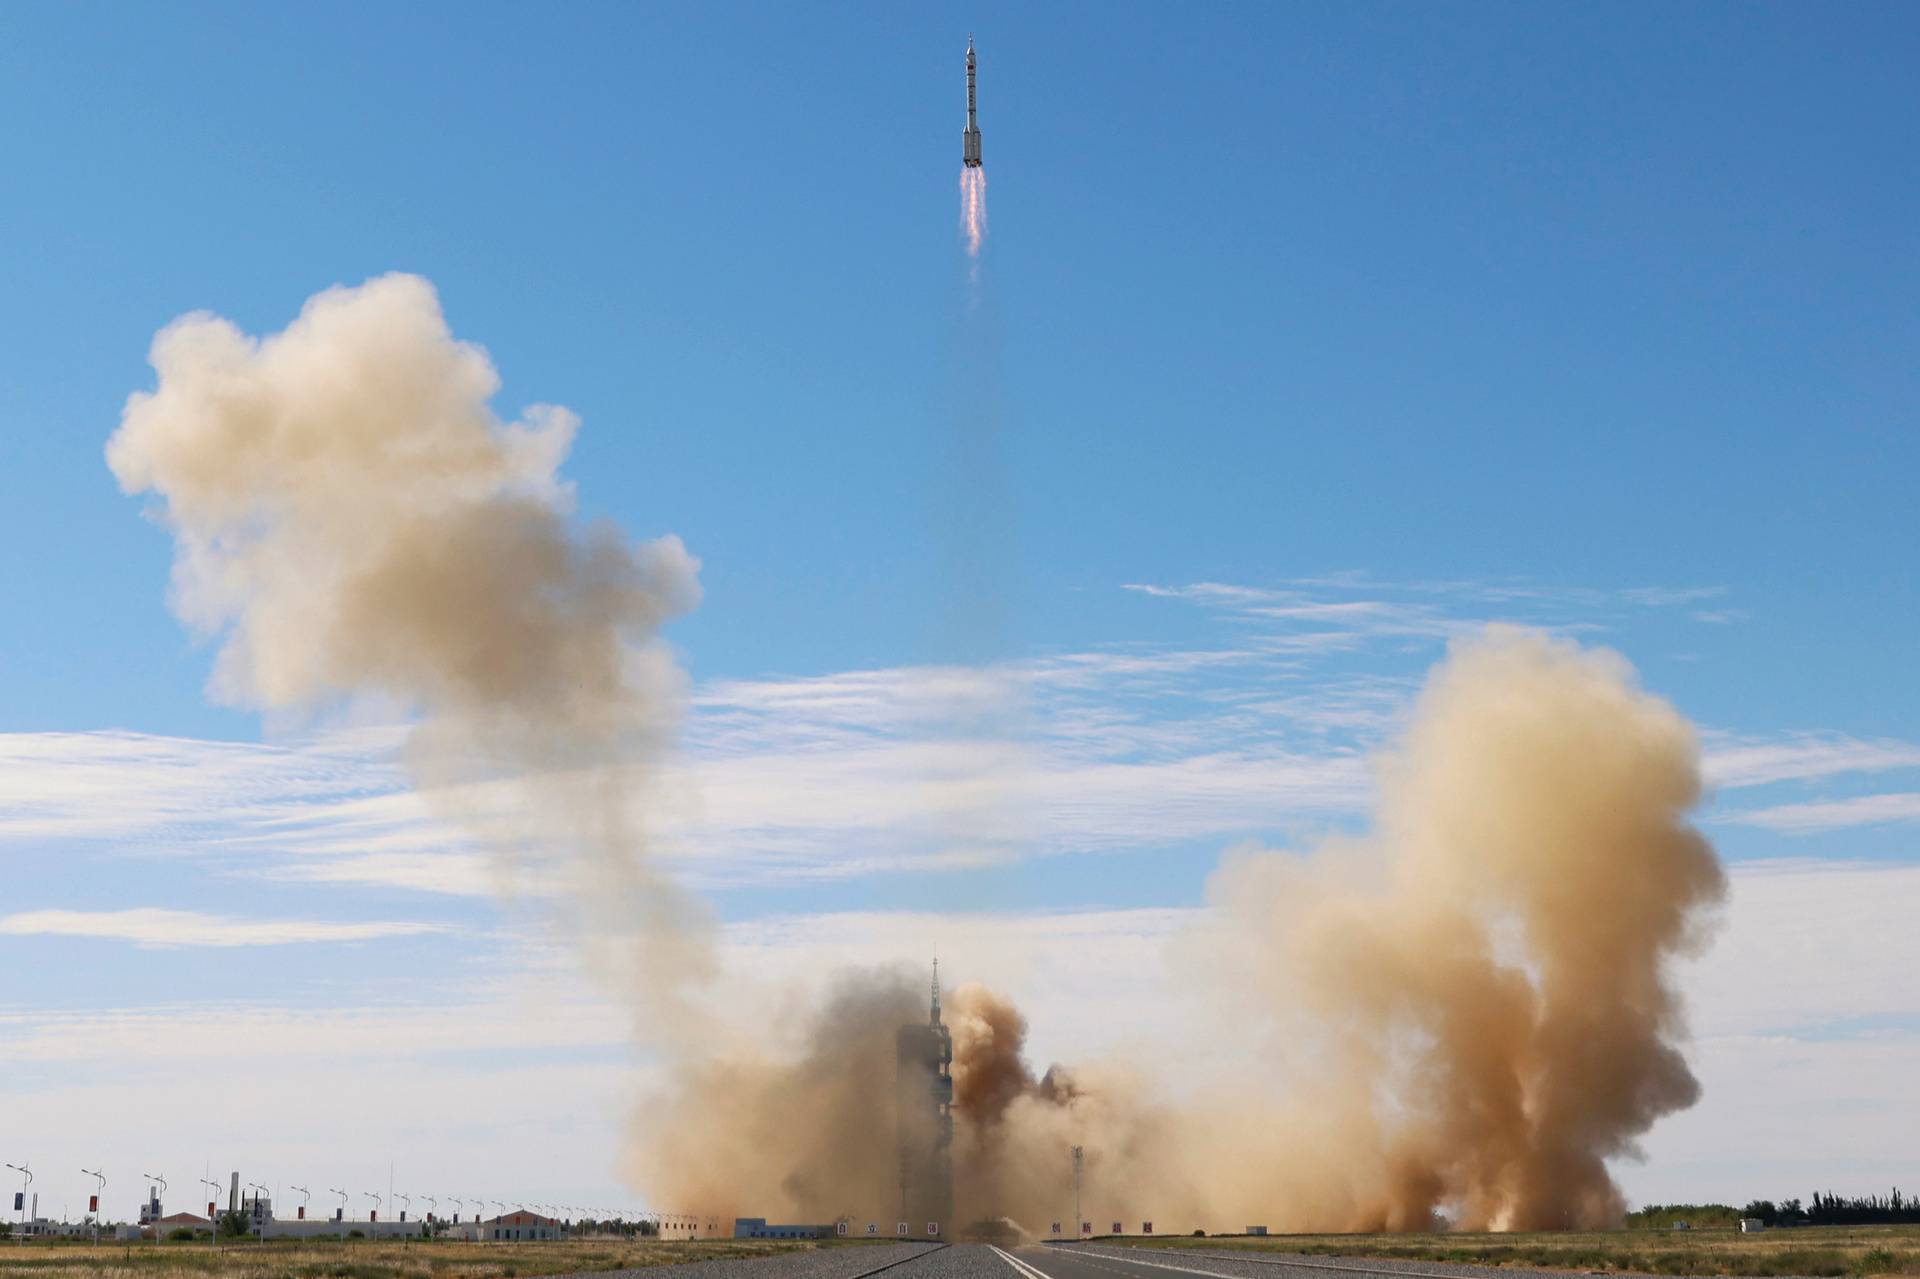 Rocket carrying the Shenzhou-12 spacecraft and three astronauts takes off from Jiuquan Satellite Launch Center